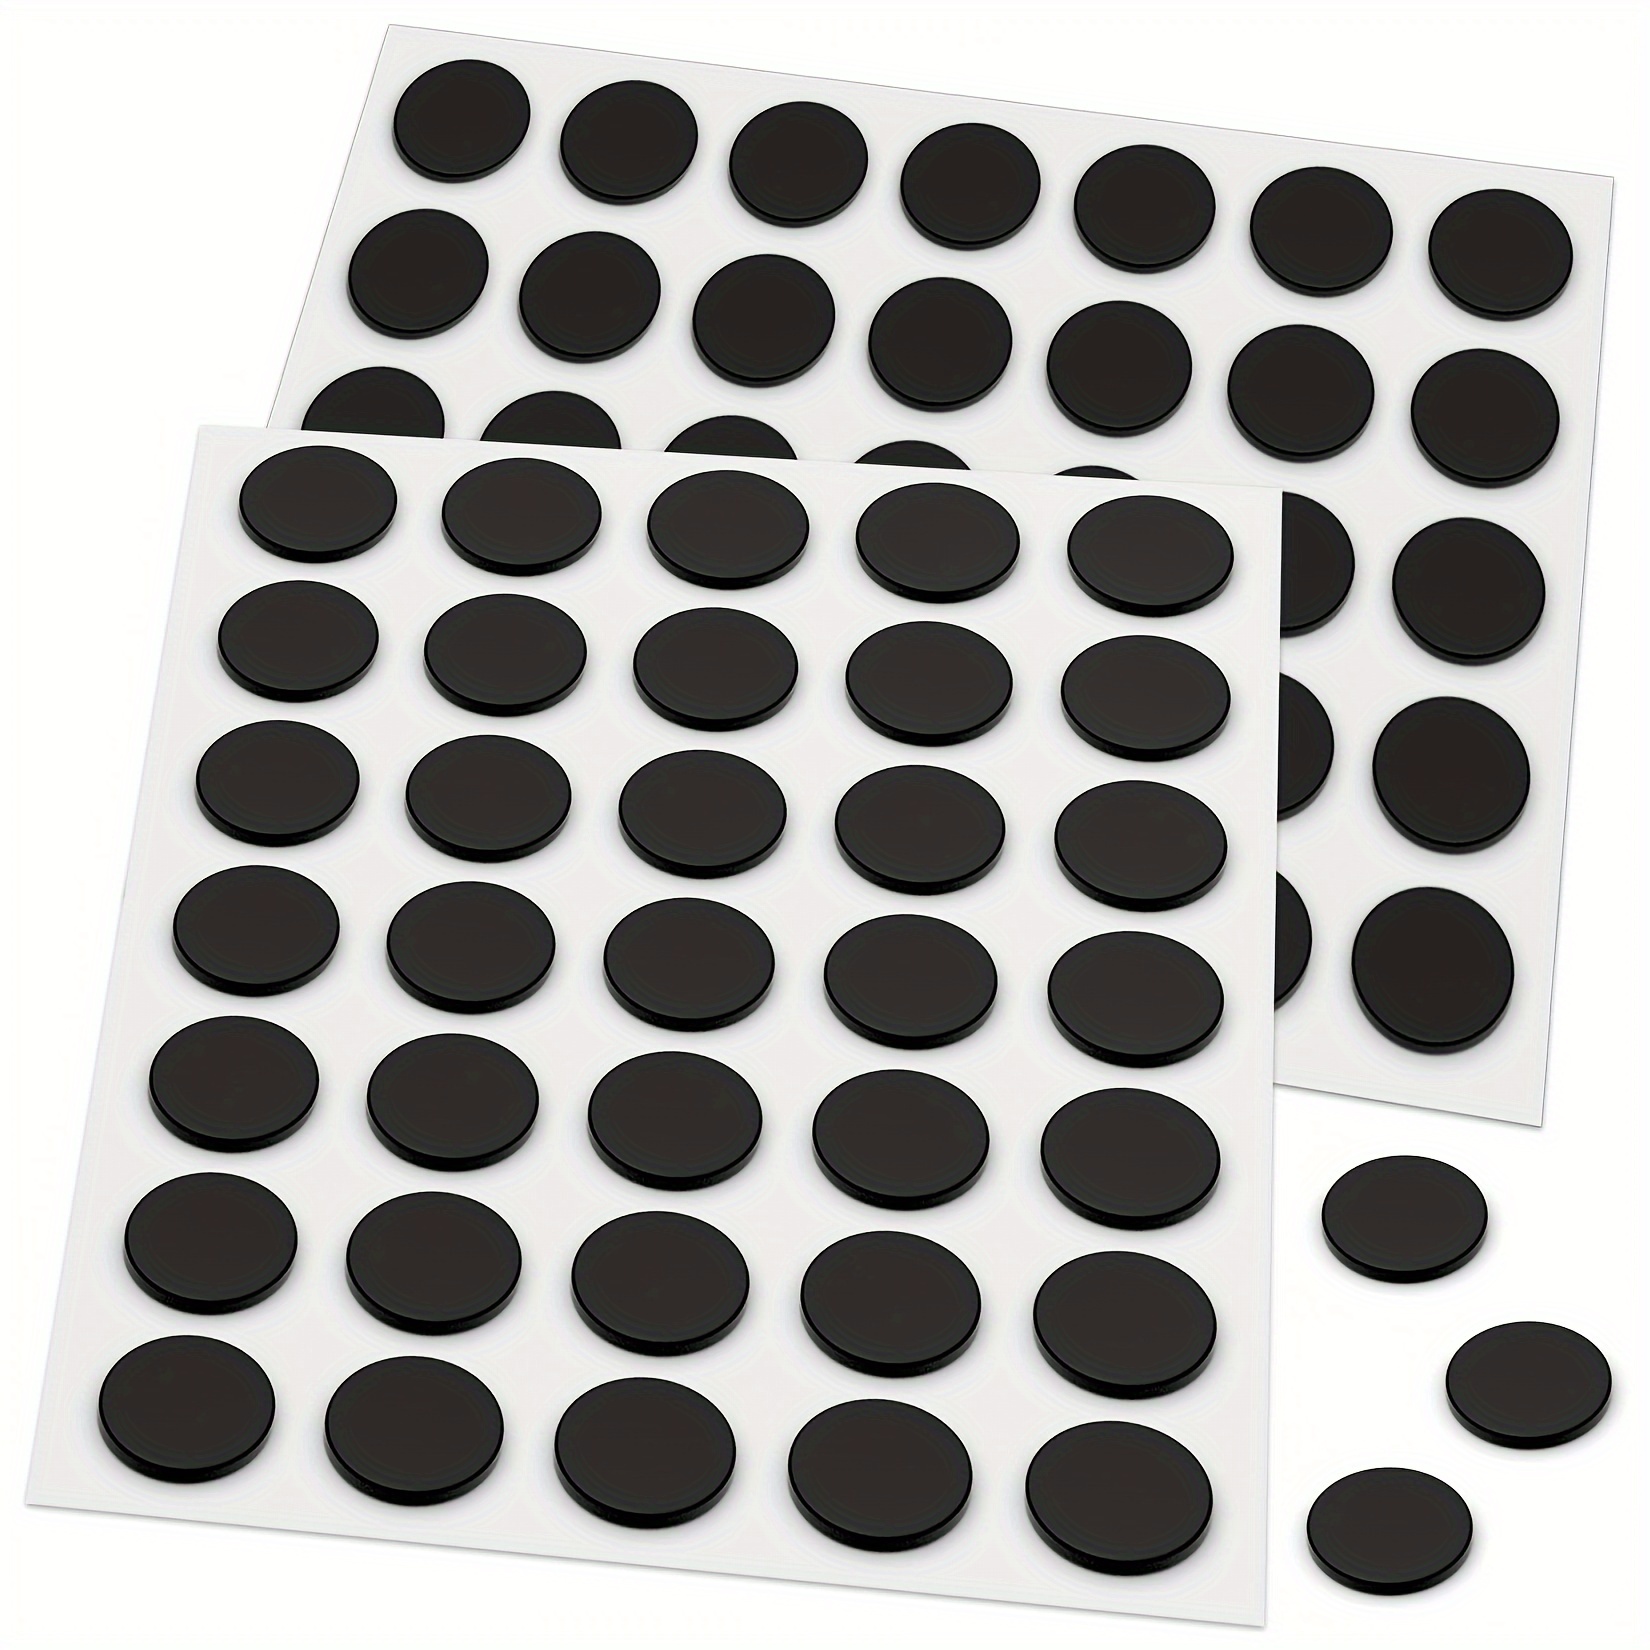 Magnets for Crafts with Adhesive Backing Small Ceramic Crafts